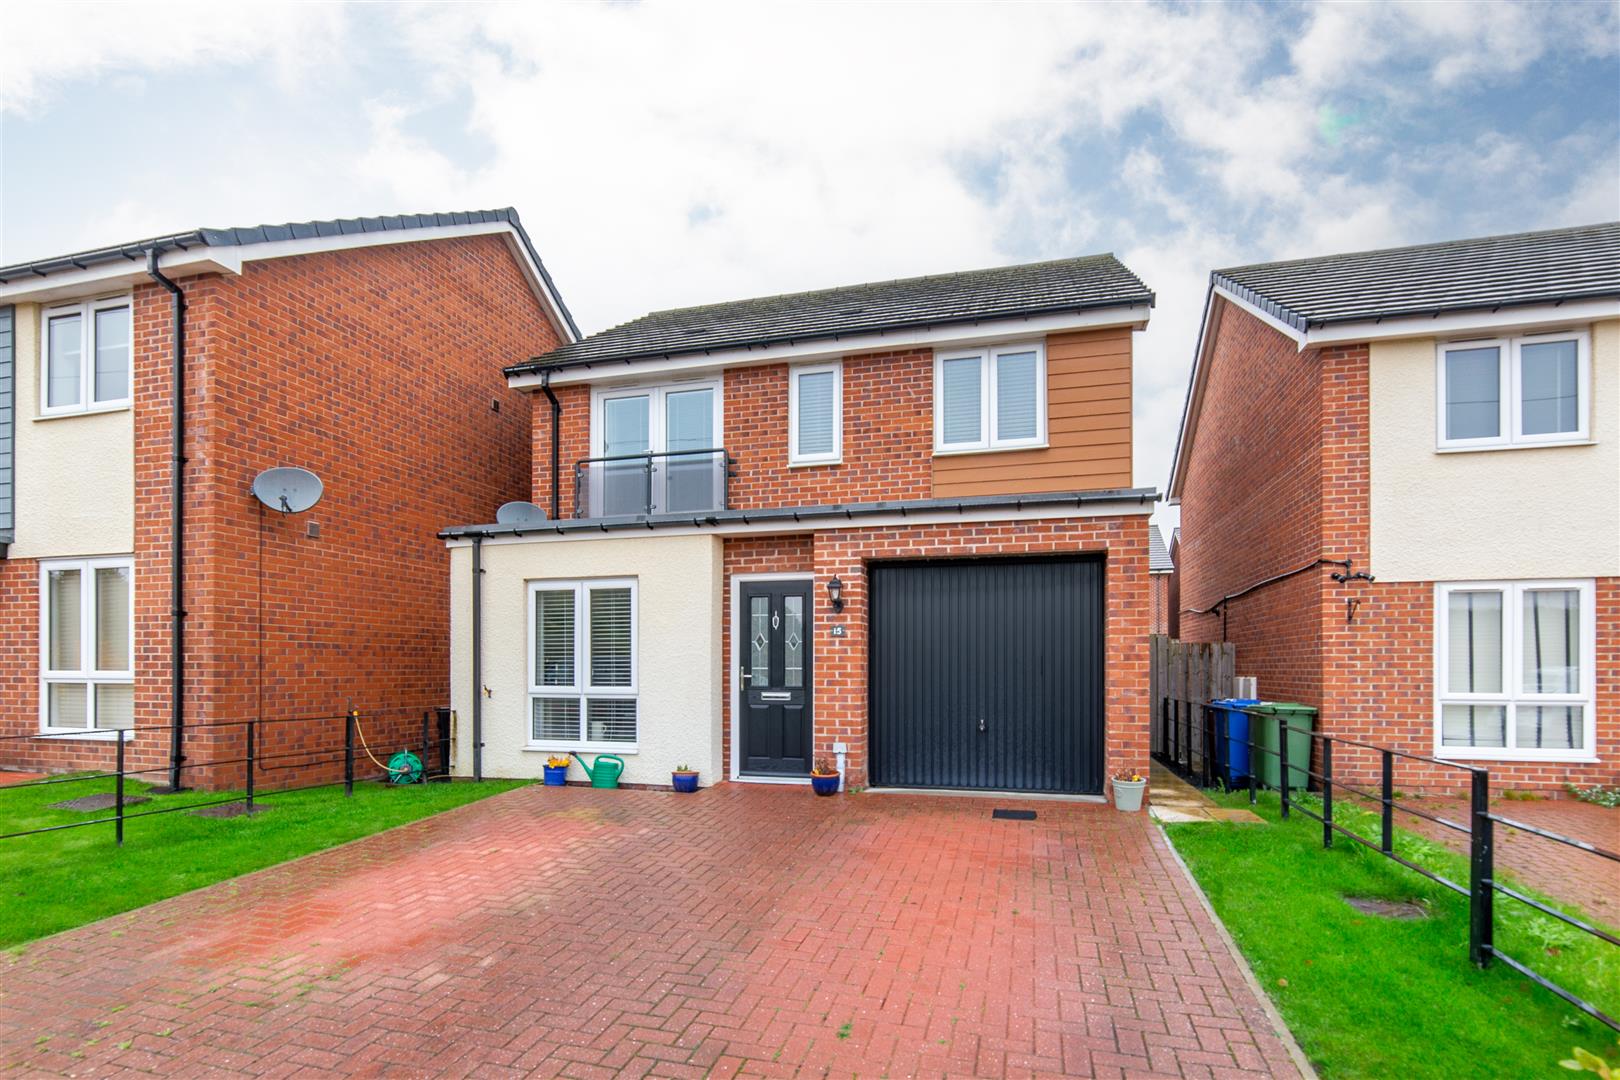 3 bed detached house for sale in Shotton View, Great Park, NE13